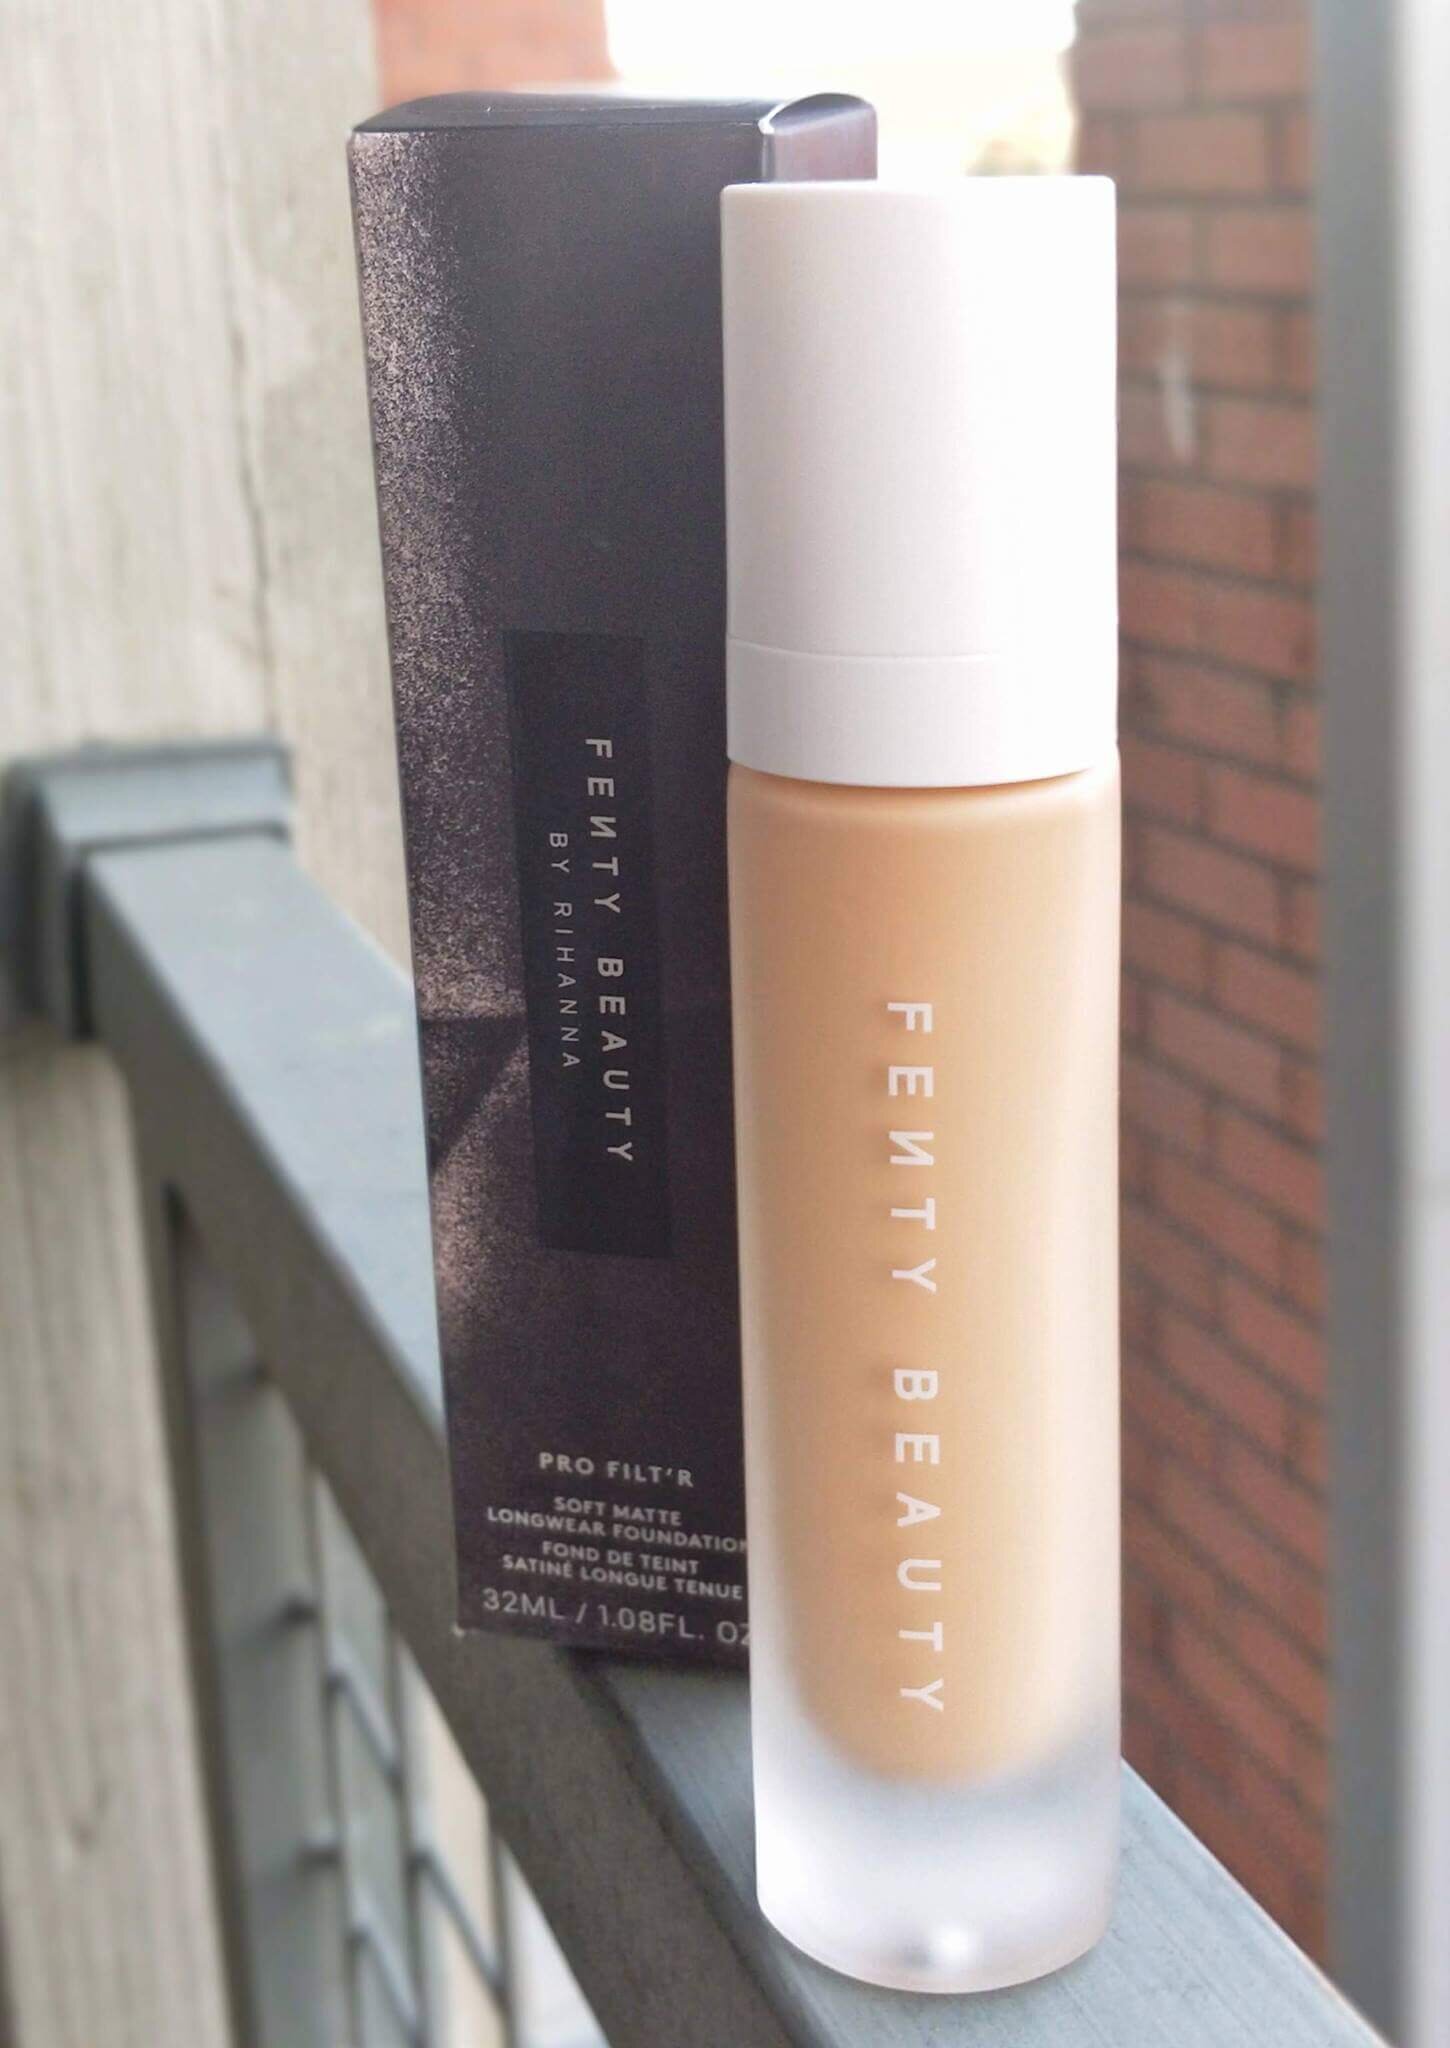 THE PALEST SHADE - Fenty Beauty Pro Filt'r Review